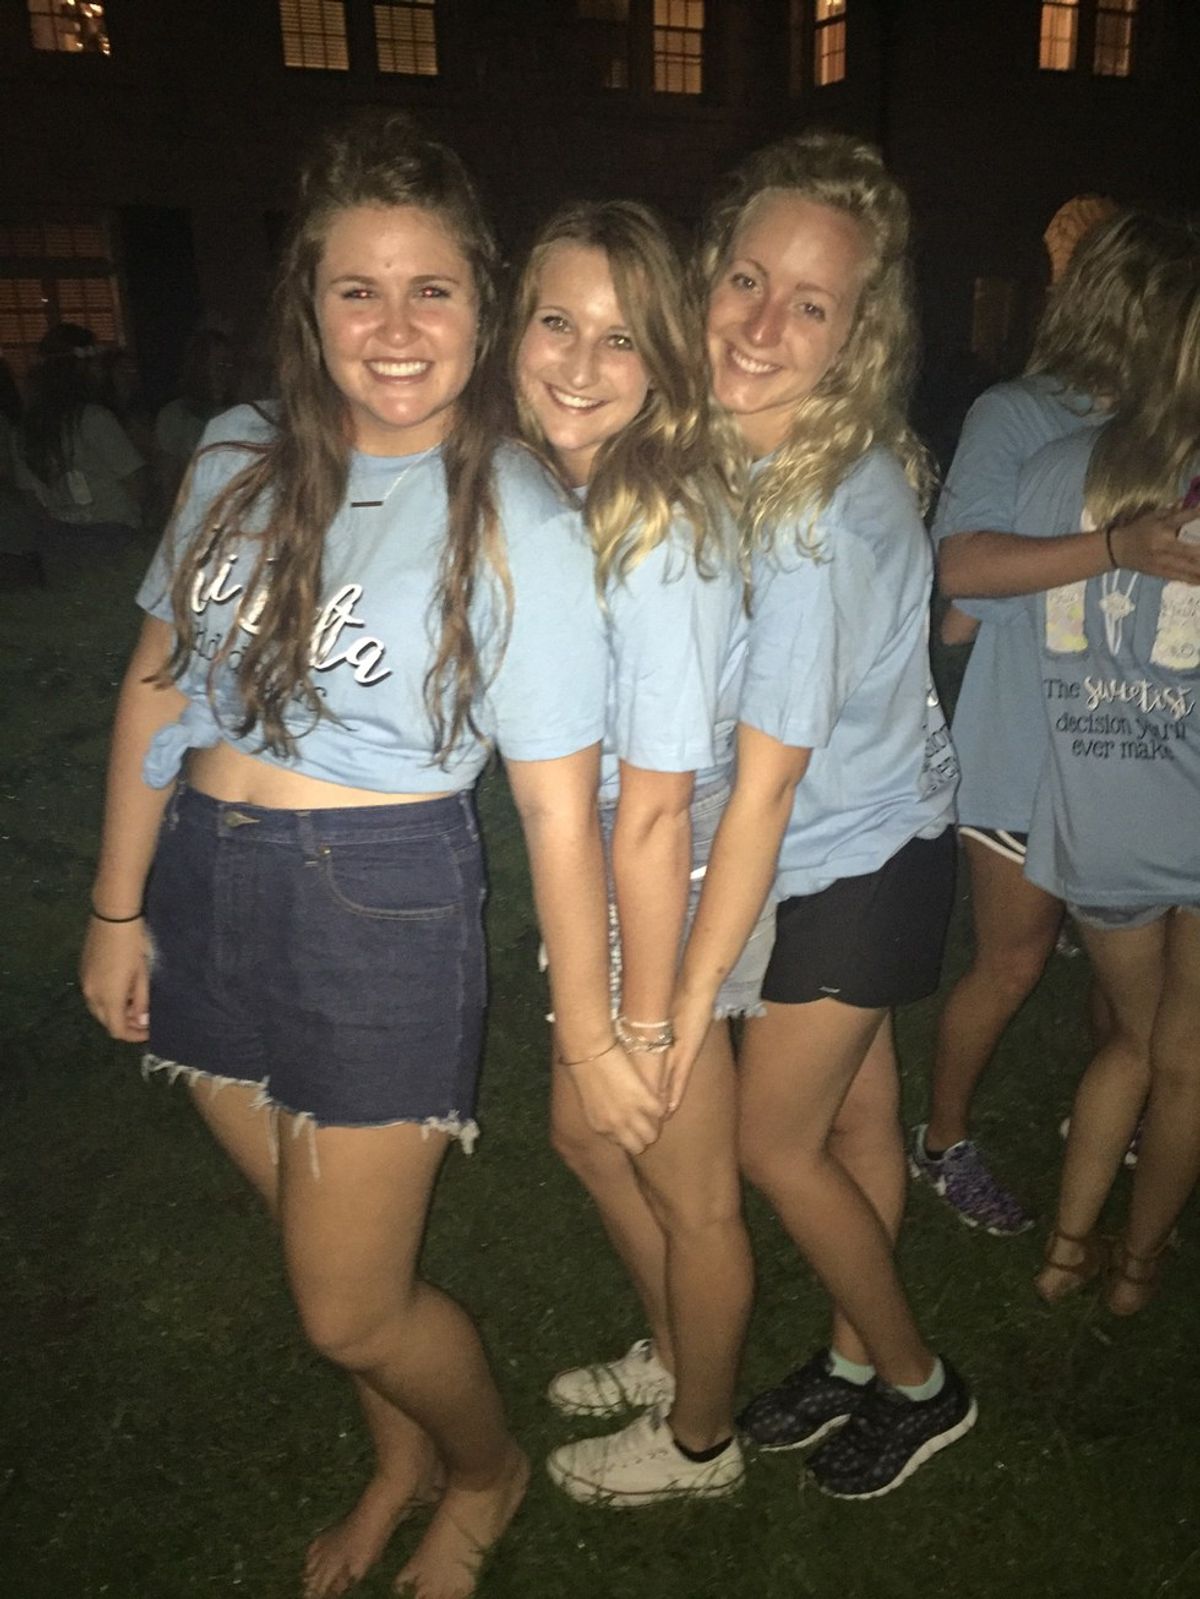 An Open Letter To My Sorority